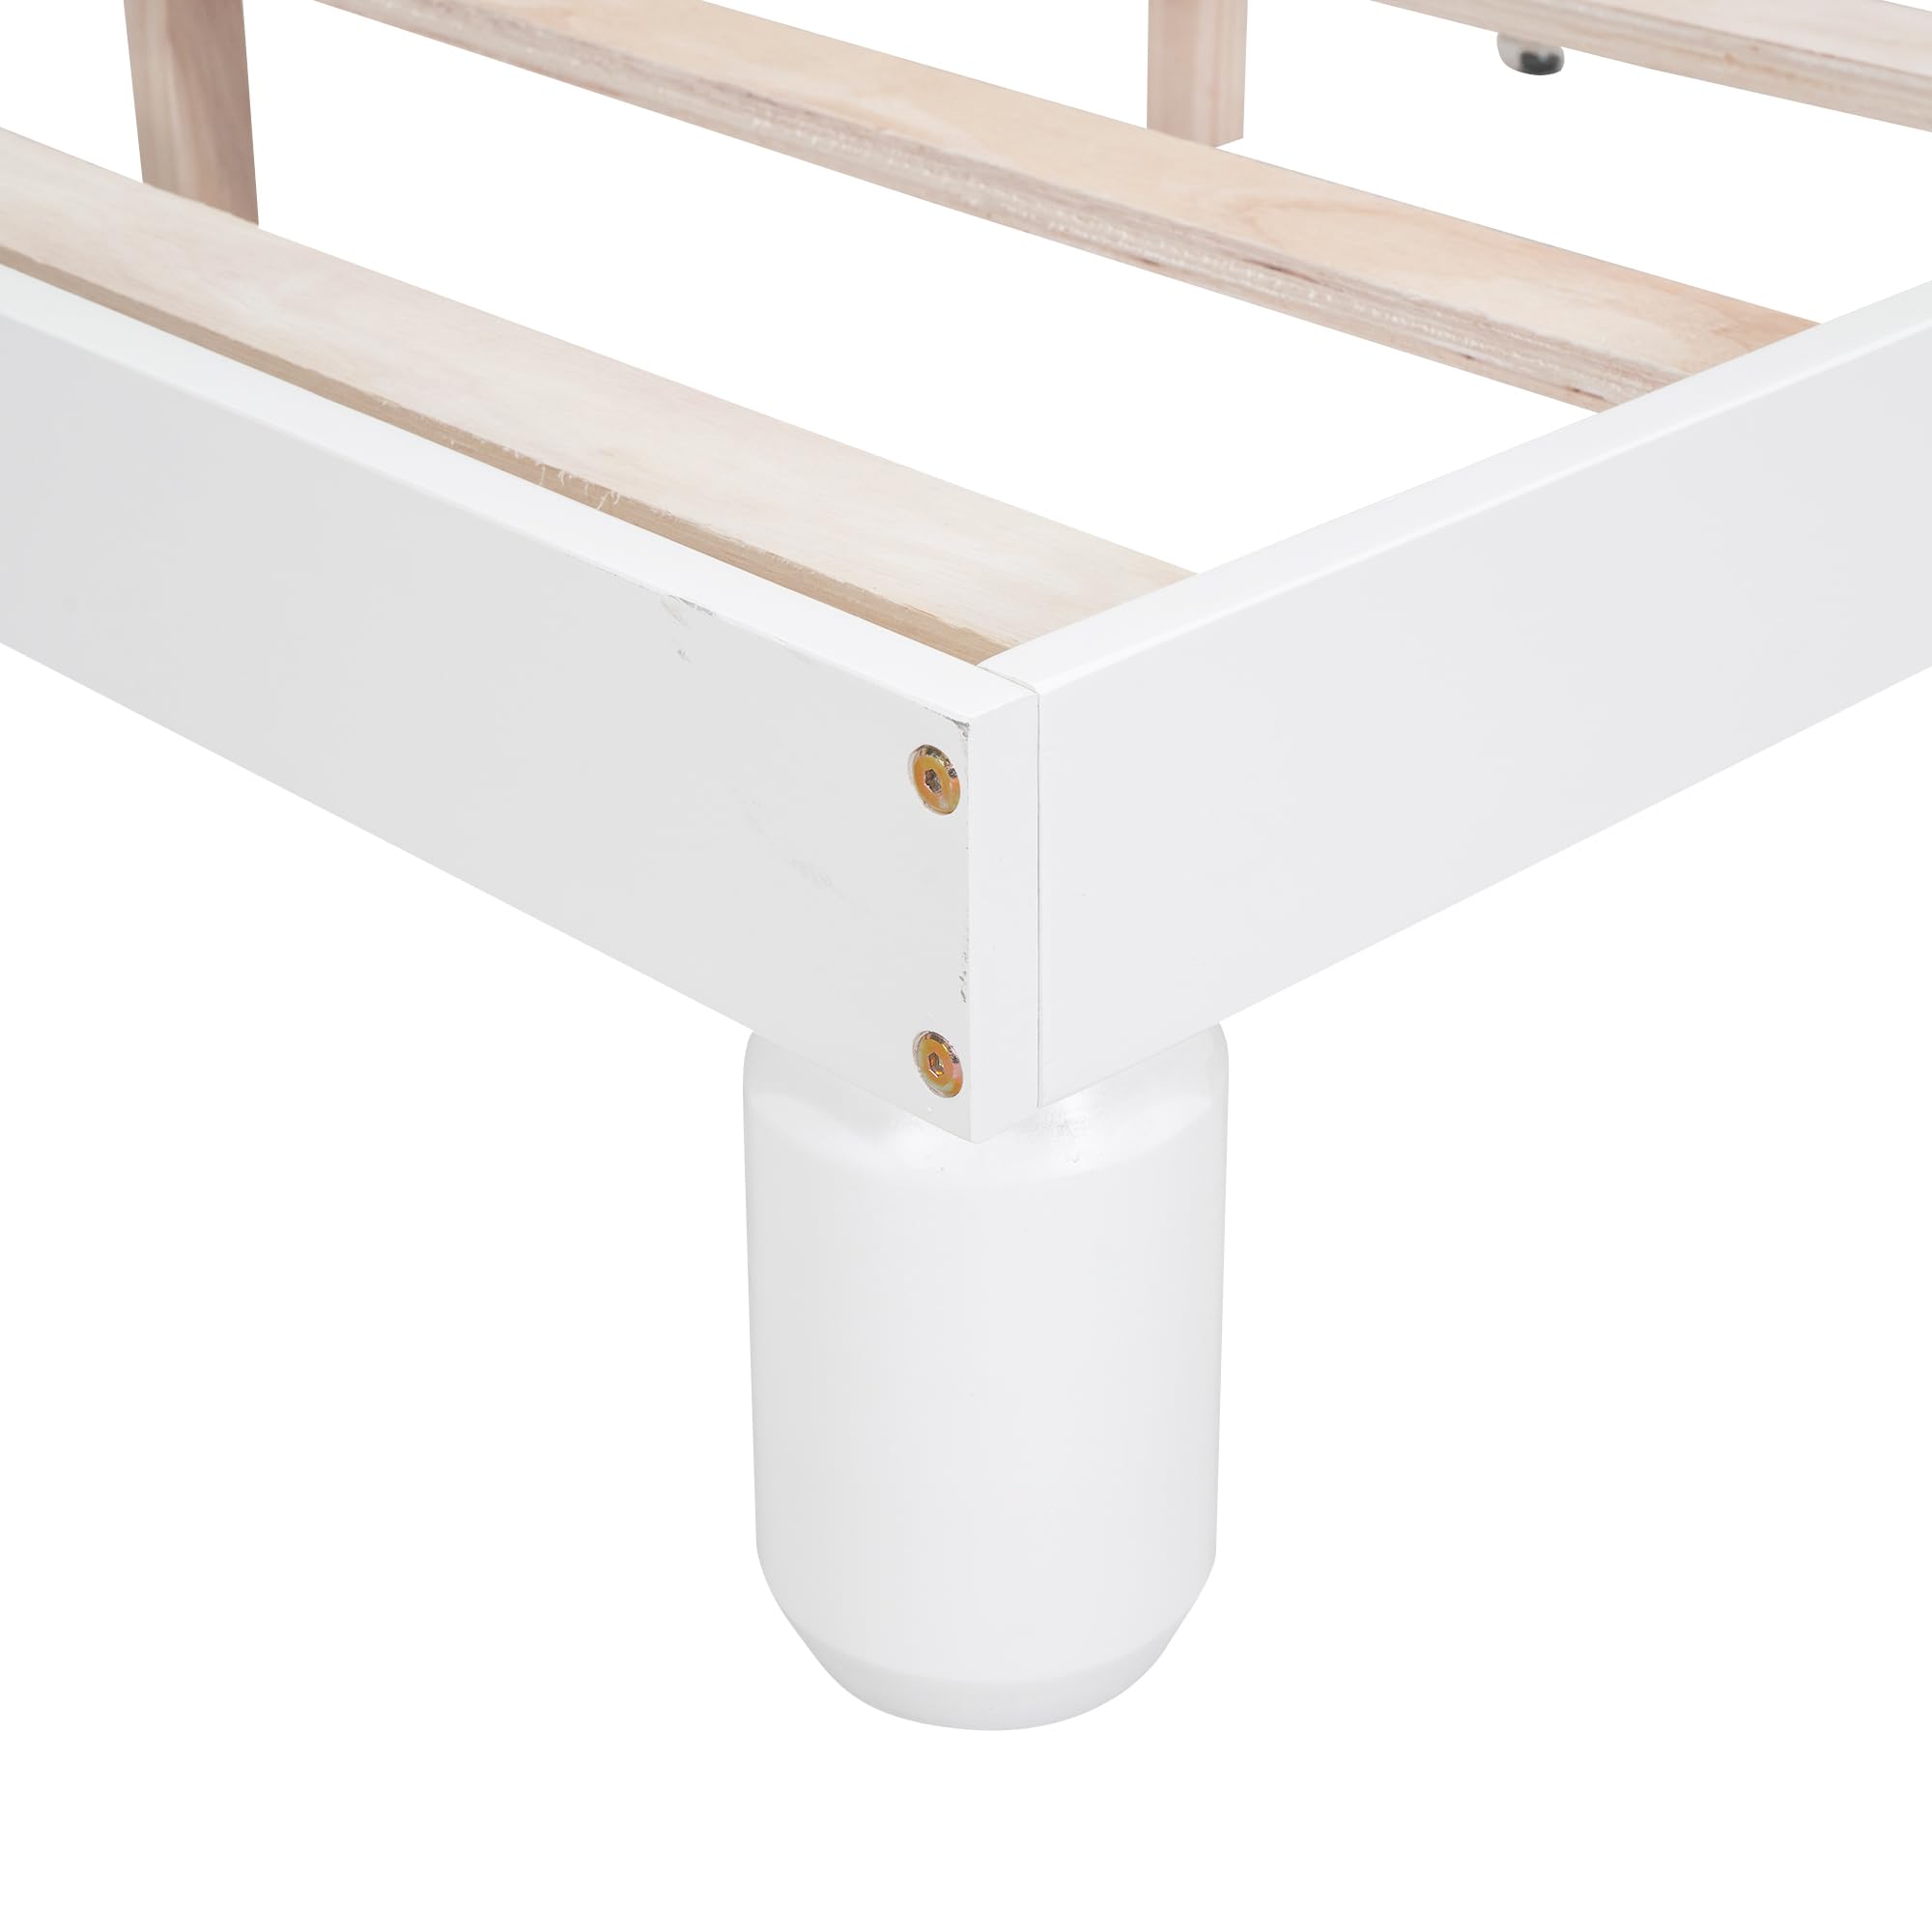 Rhomtree Twin Bed Frame with Bear Ears Shaped Headboard and LED,Wood Twin Size Platform Bed Frames with Headboard for Boy Girl Kids,No Box Spring Needed(White, Twin)